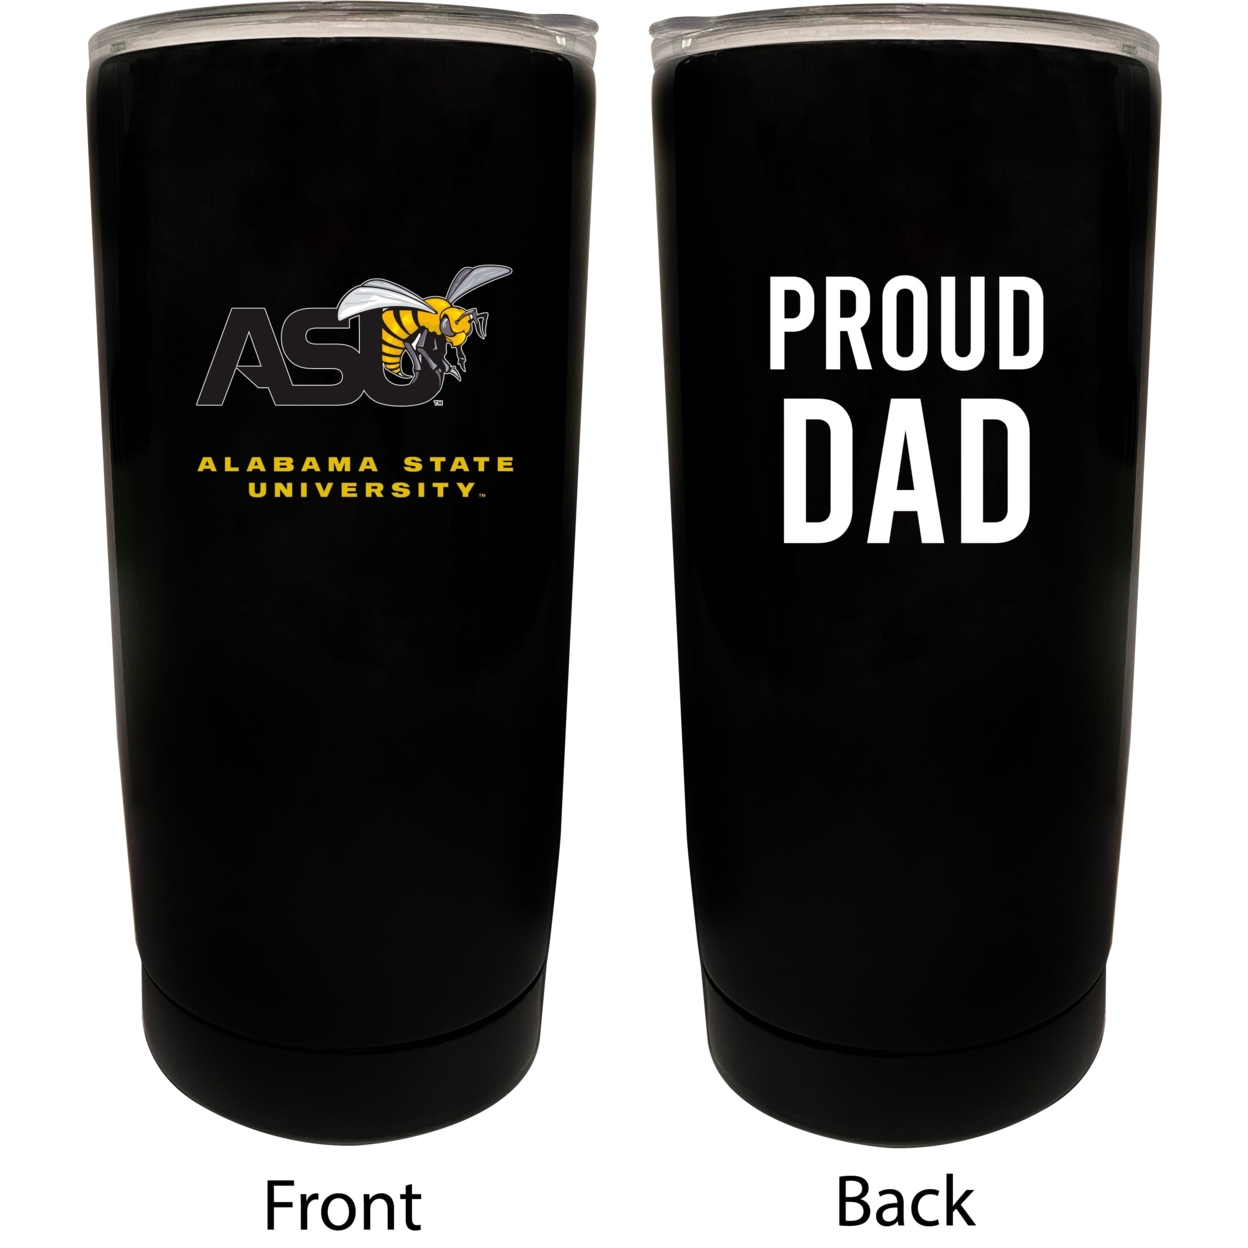 Alabama State University Proud Dad 16 Oz Insulated Stainless Steel Tumblers